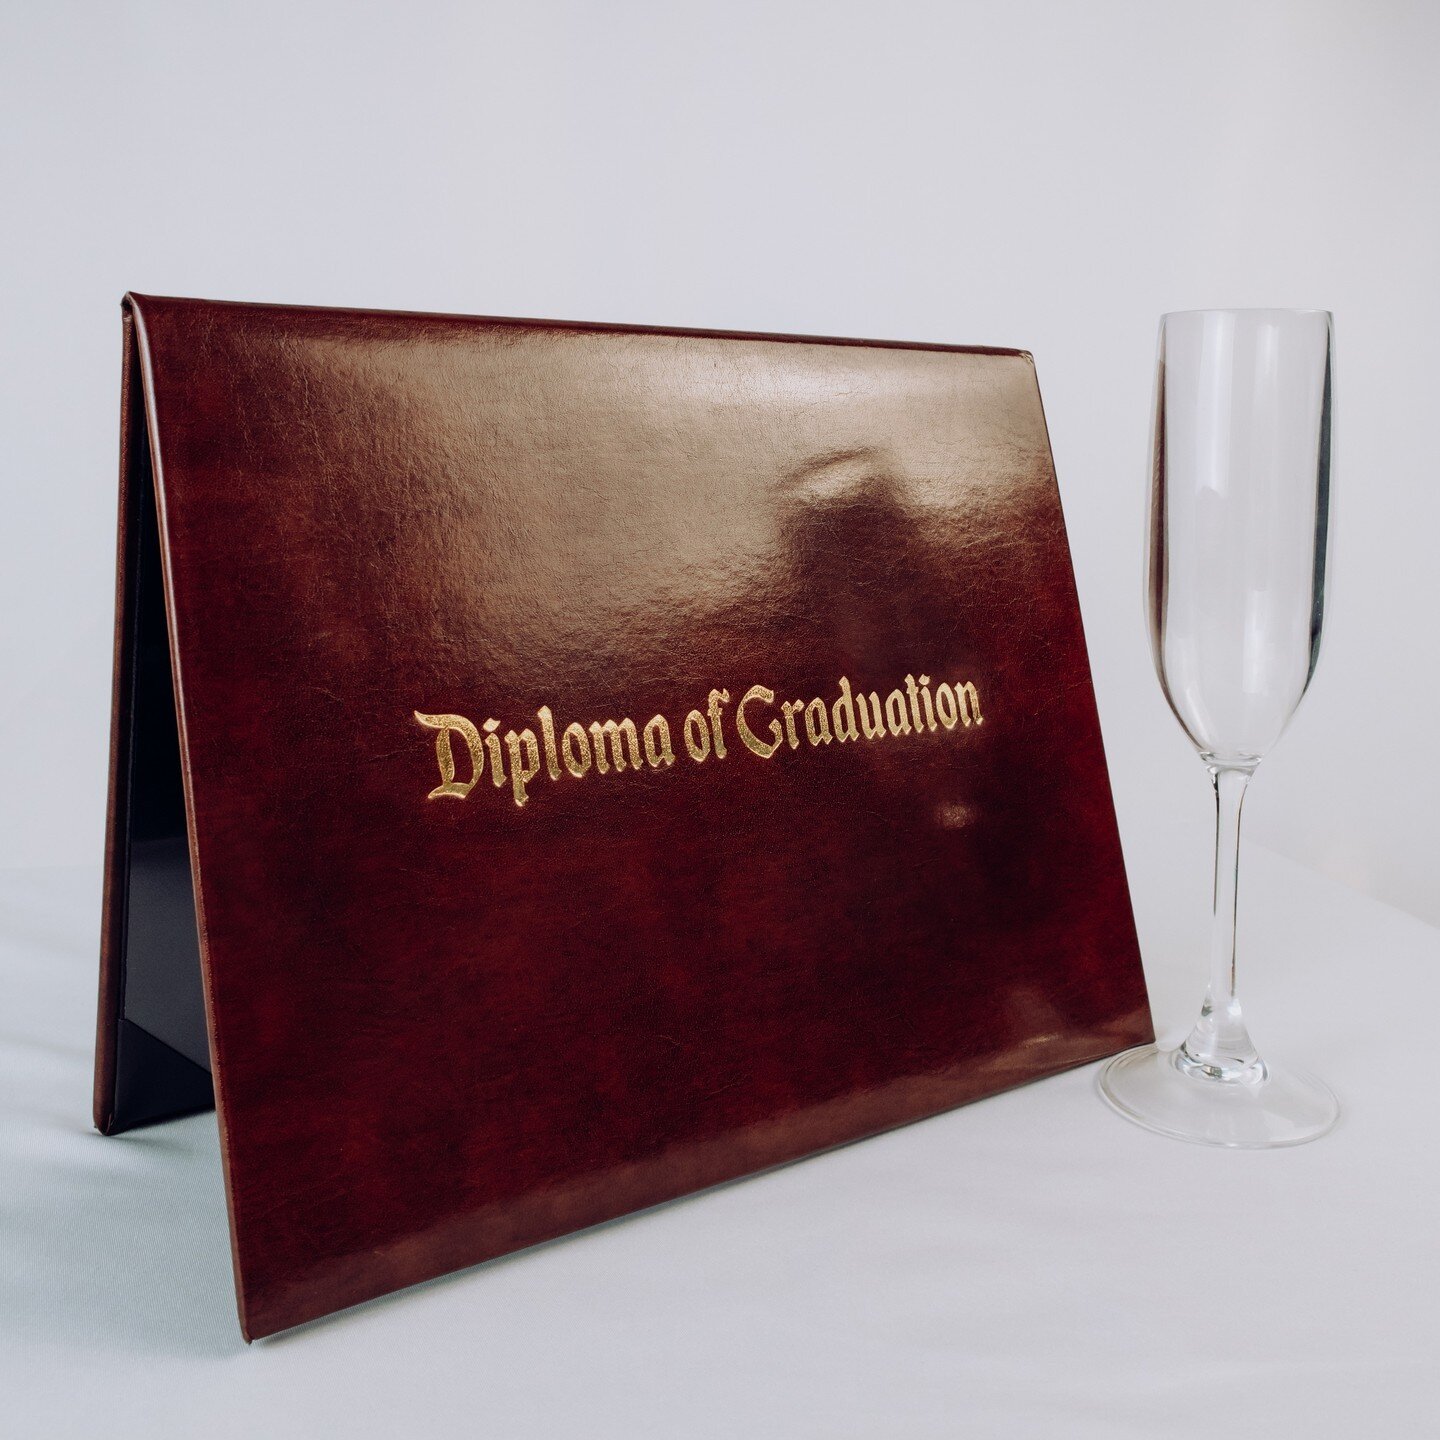 After all the hard work you've put in, it's time to show off by getting a cover that reflects your accomplishments and achievements with finesse. Our handcrafted leather diploma covers provide a timeless and classy way to showcase your hard-earned gr